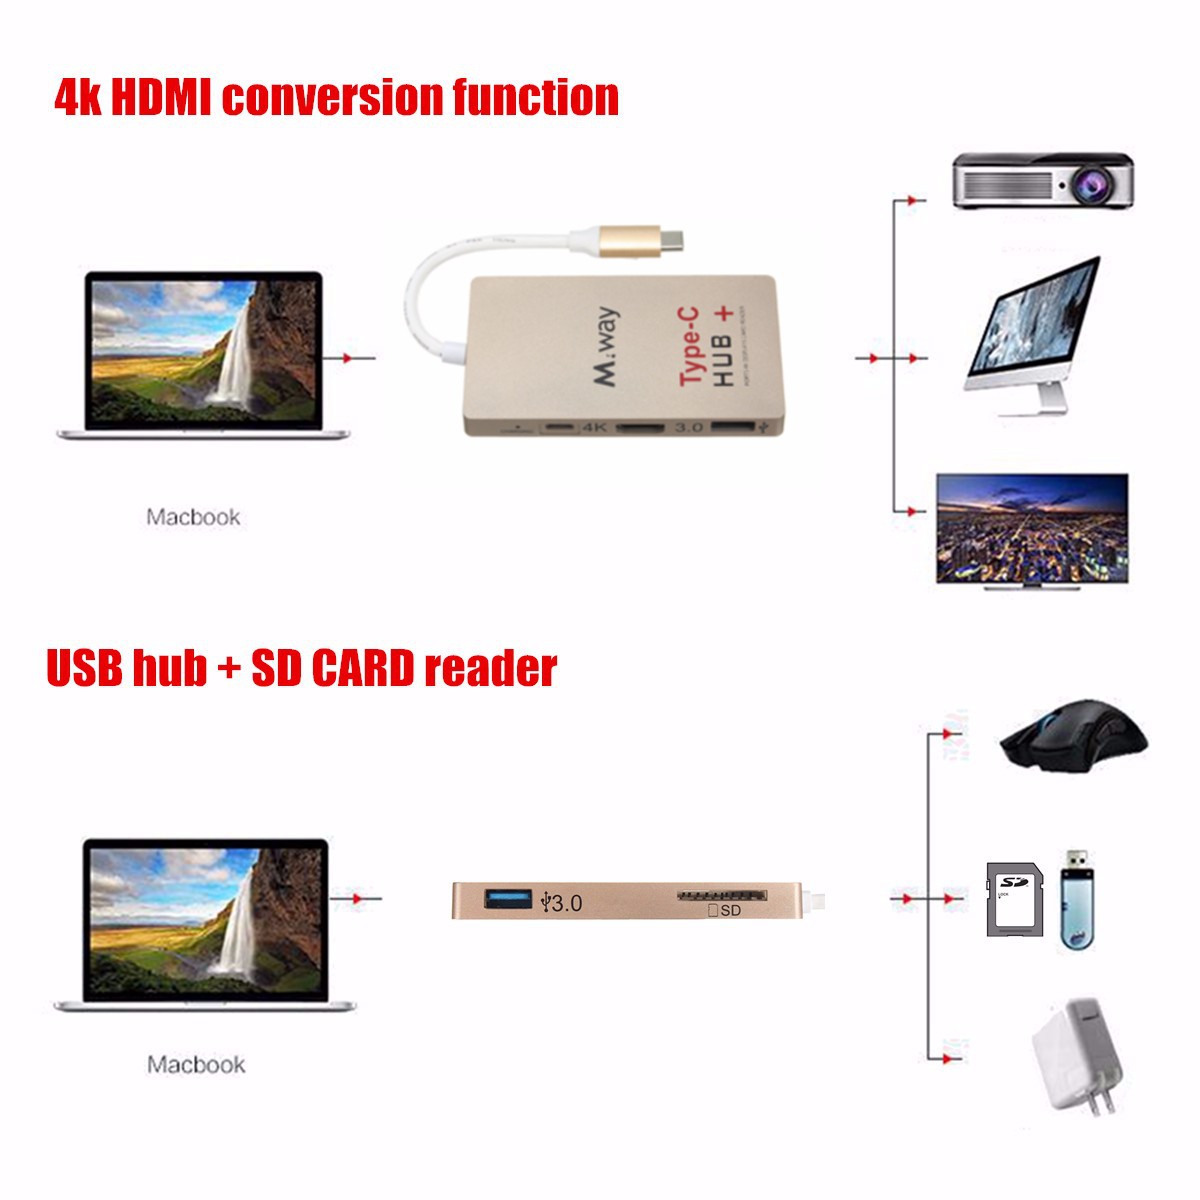 M.Way USB 3.1 Type-C to 4k HDMI USB 3.0 HUB USB-C Charger SD Card Reader Adapter